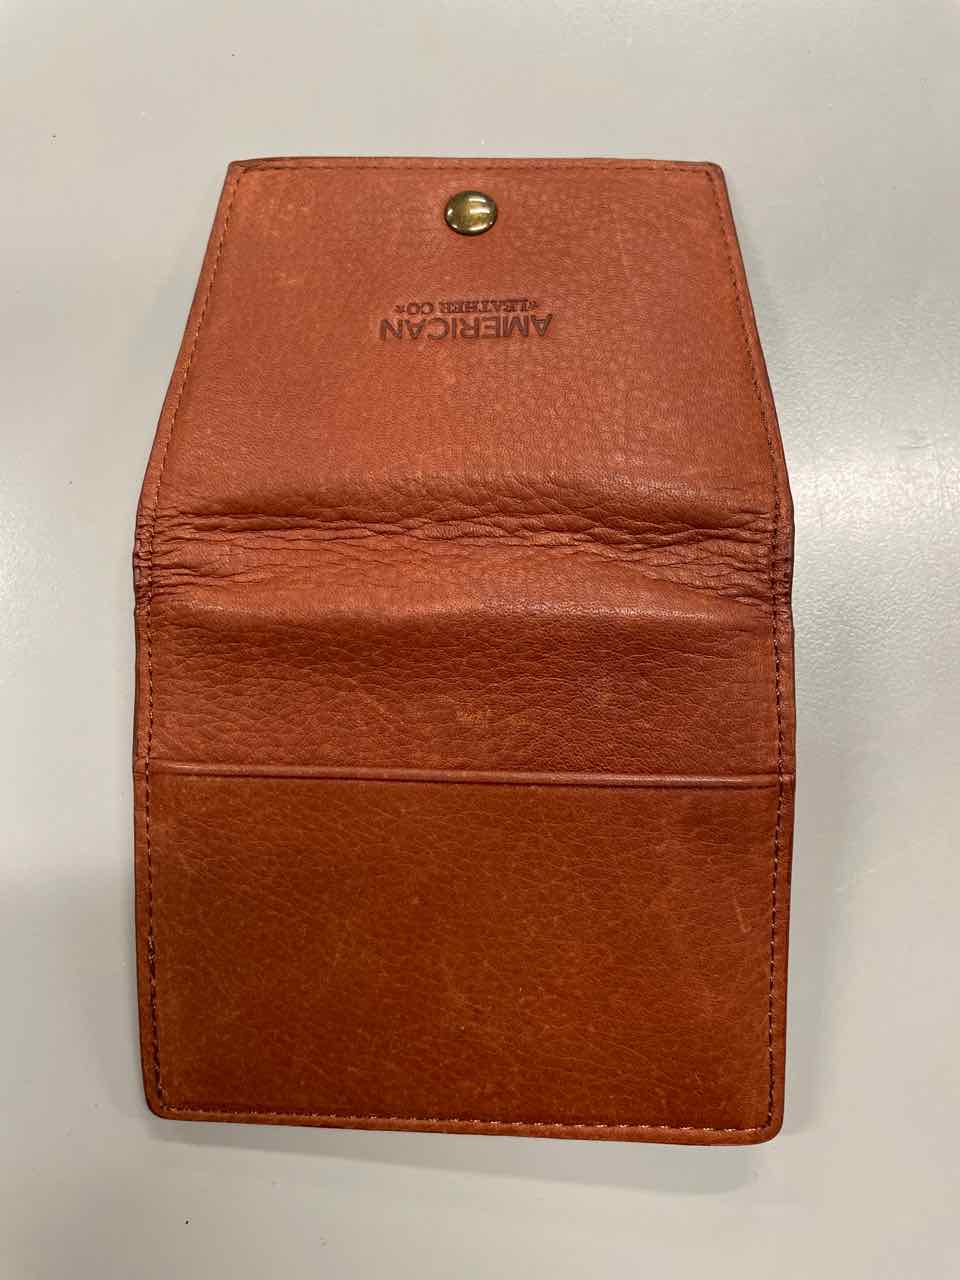 Accessories - American Leather Co Wallet